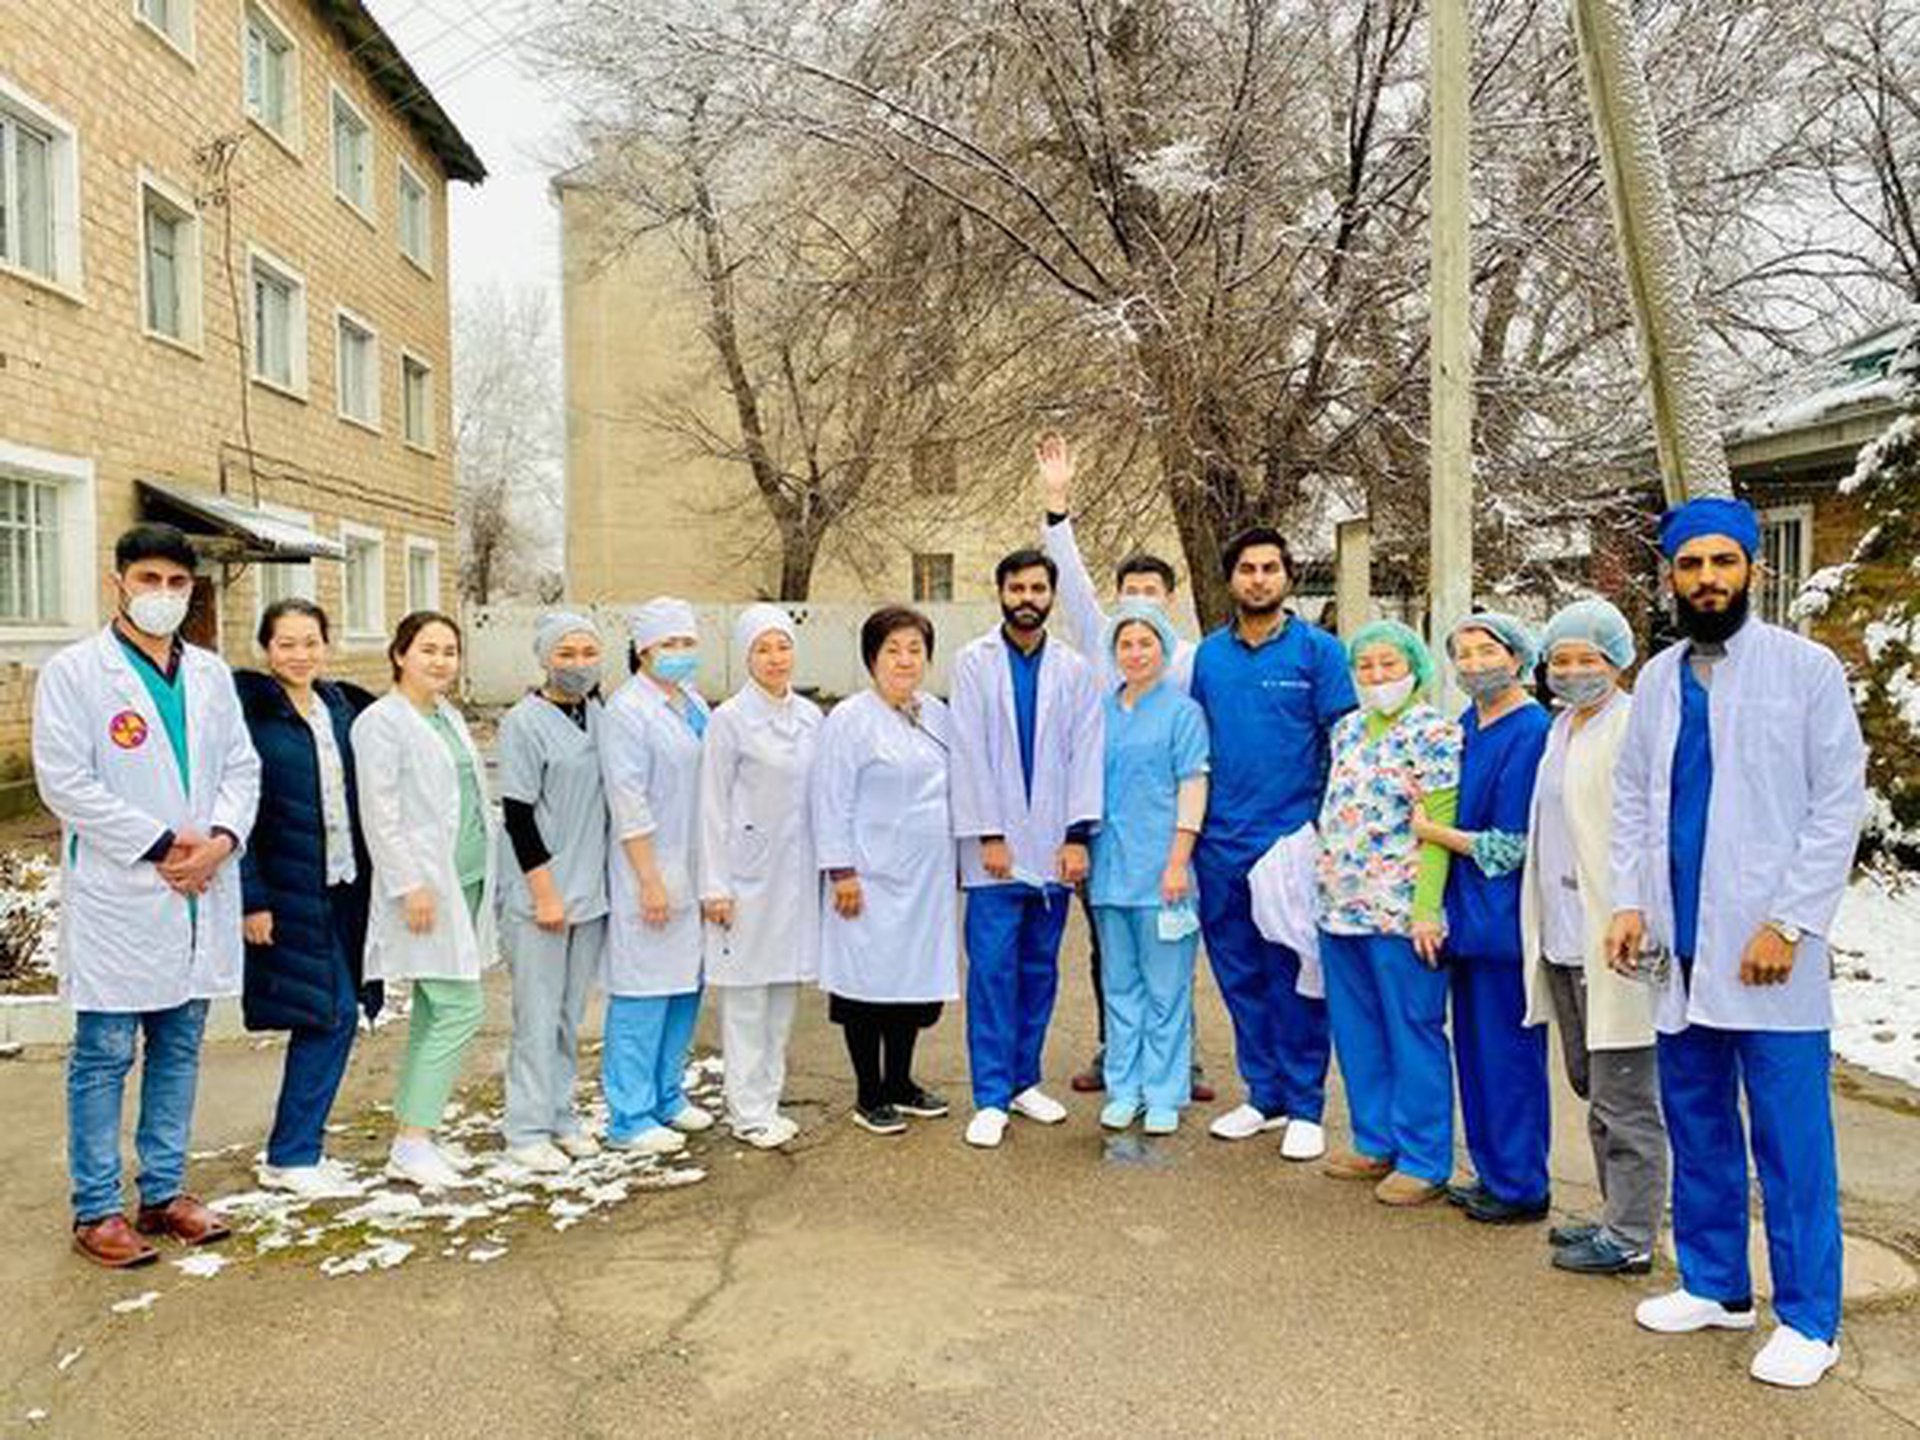 Students of the 6th semester of the School of medicine at Adam University attended Tokmok hospital and learned basic techniques to examine patients